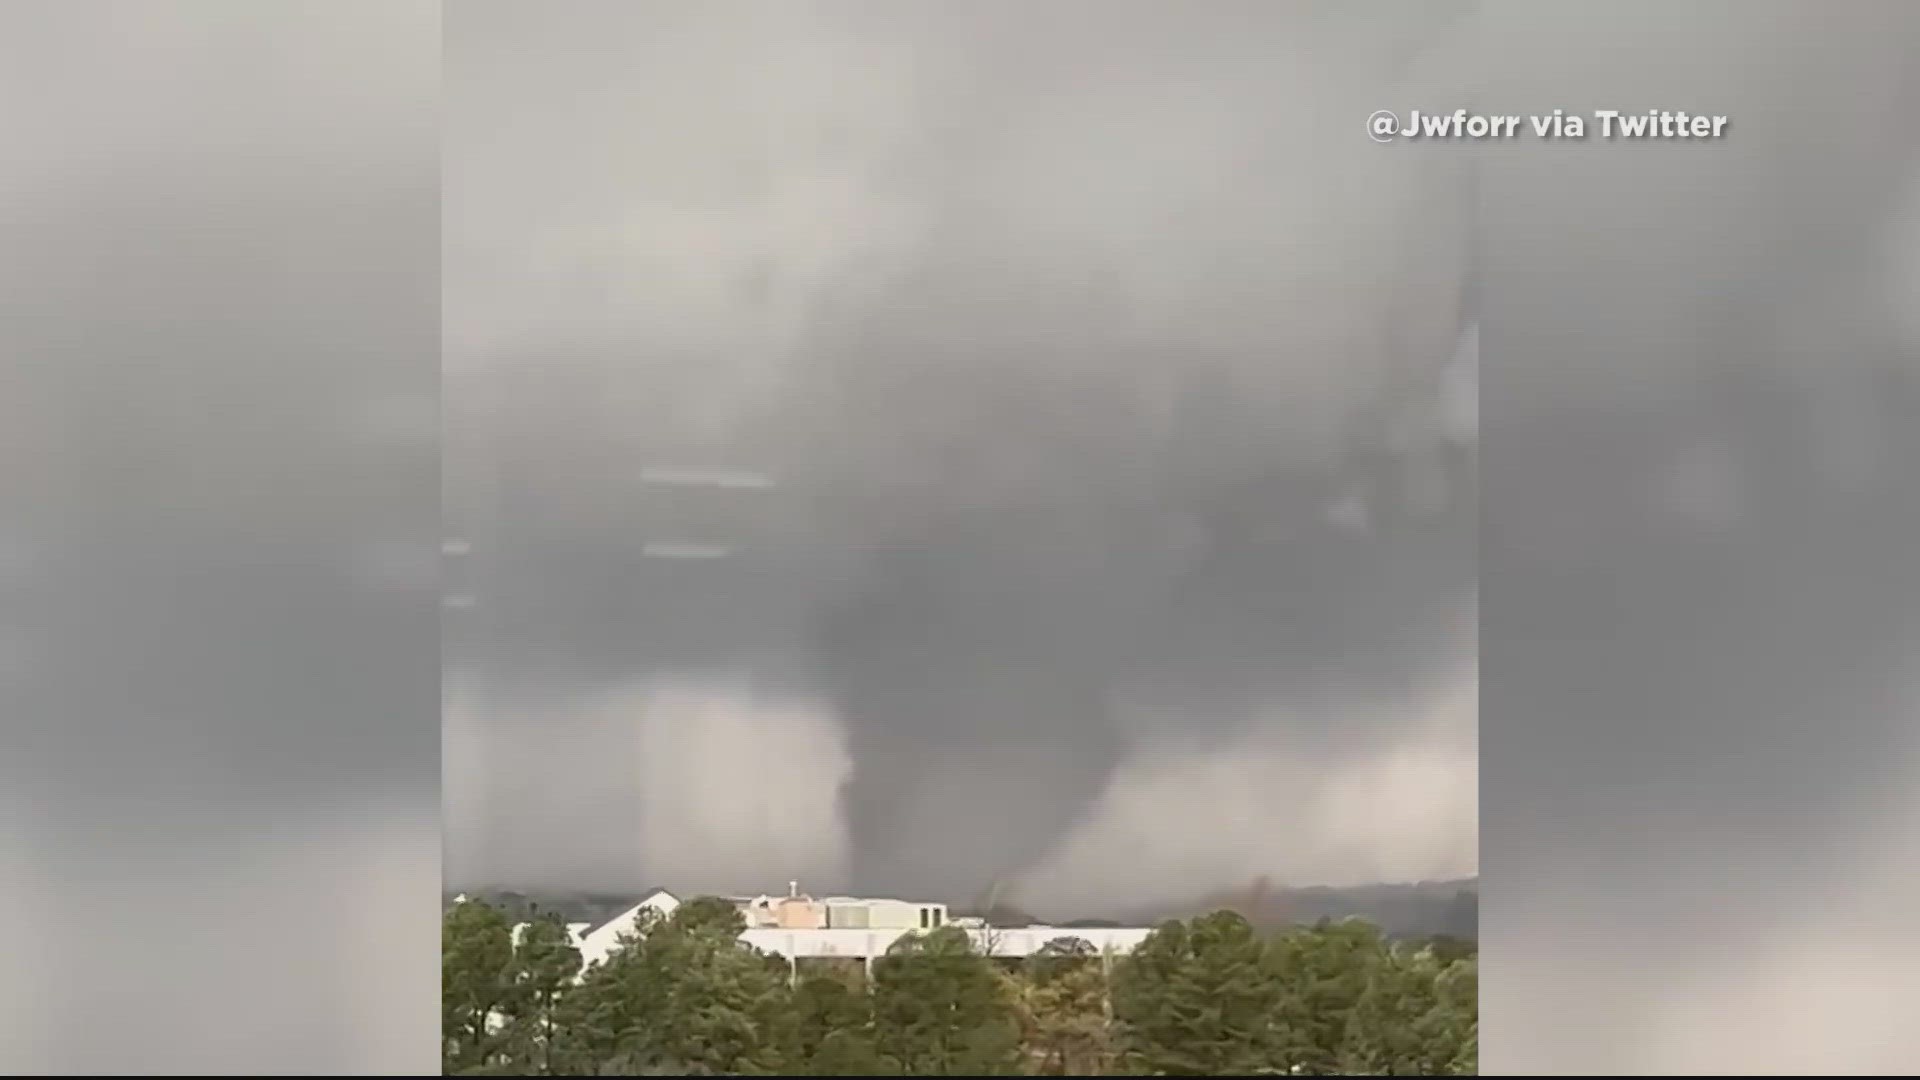 Little Rock was hit by what's being described as a "catastrophic" tornado by meteorologists on Friday as severe storms moved throughout Arkansas.